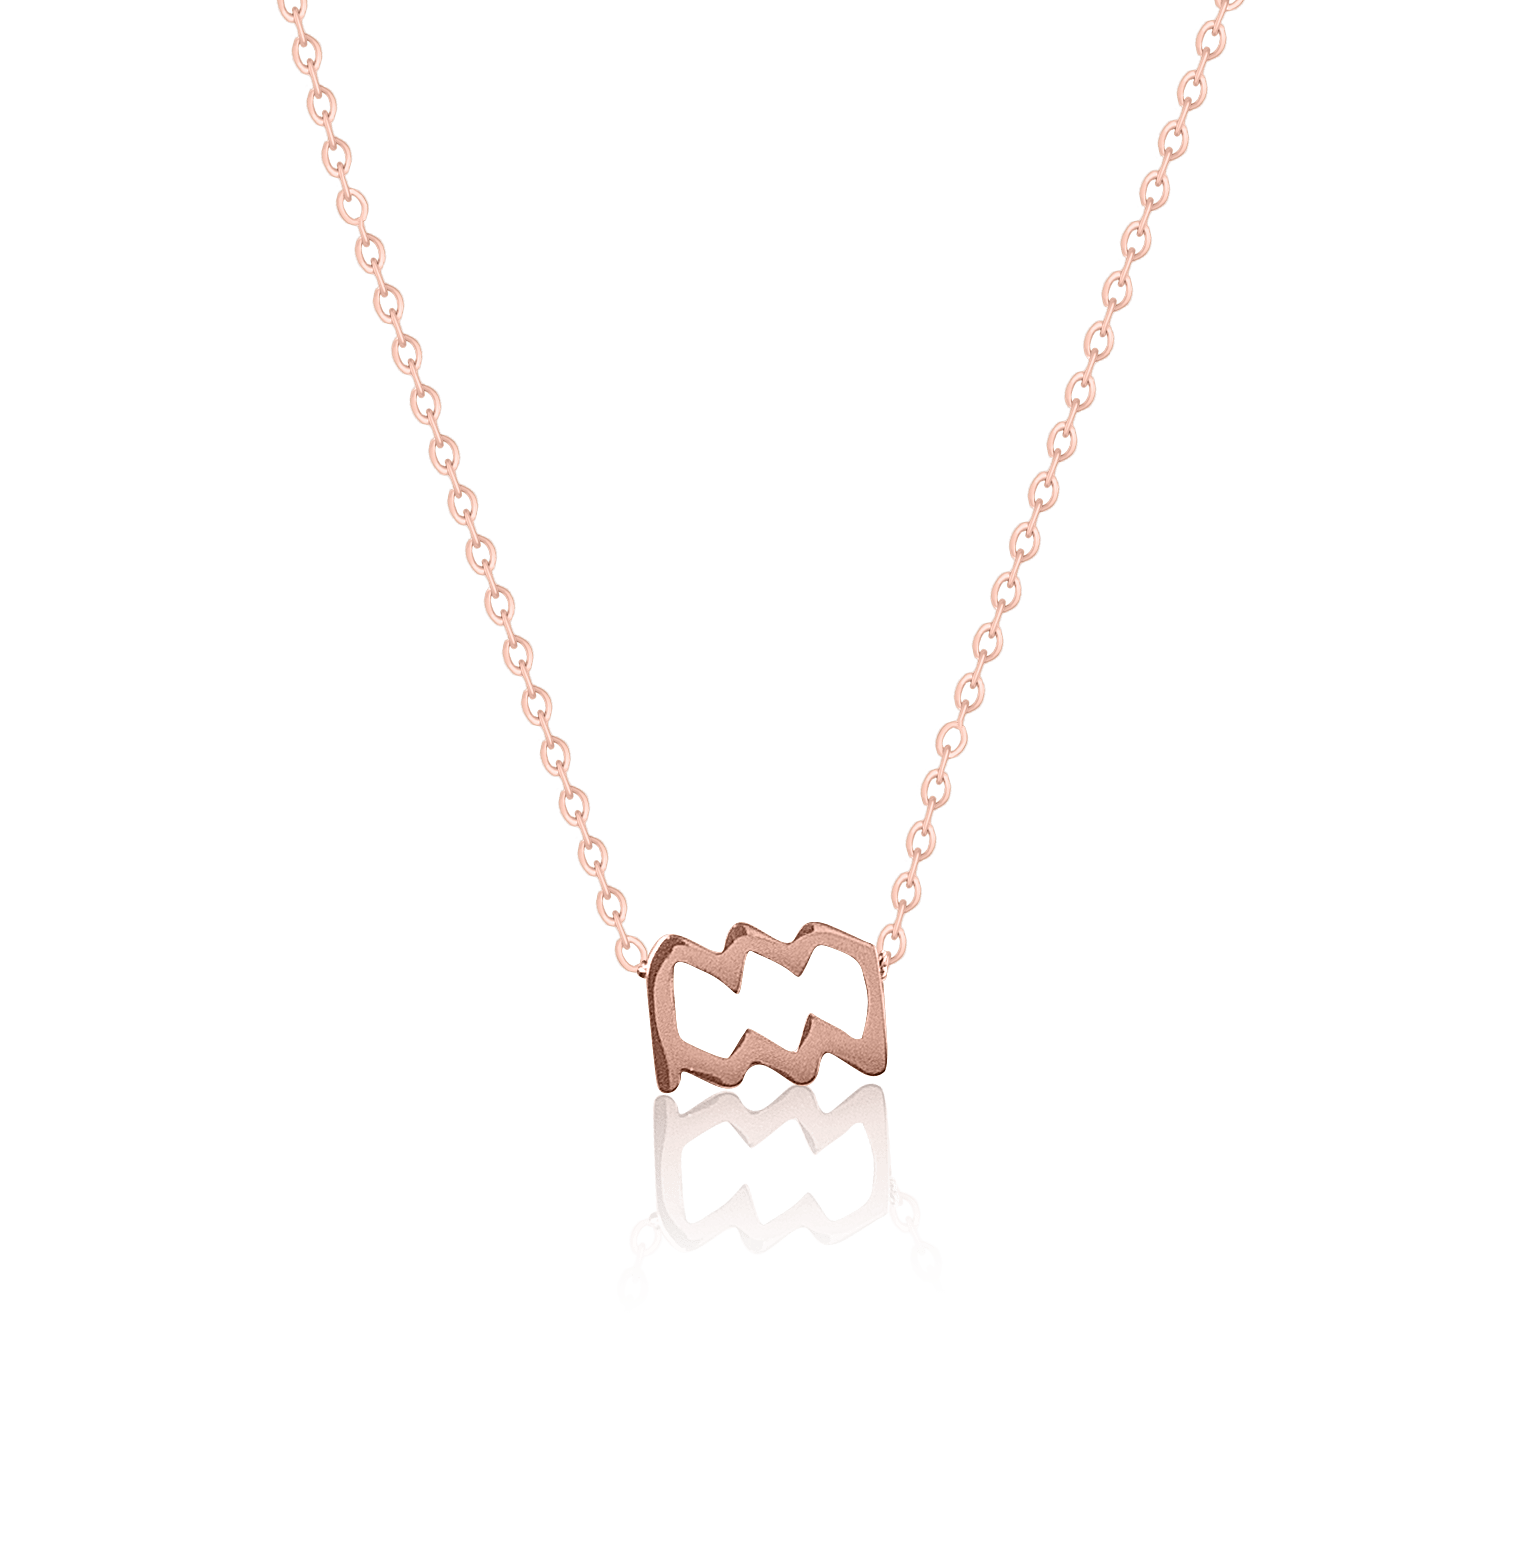 bianco rosso Necklaces Rose Gold Aquarius - Necklace cyprus greece jewelry gift free shipping europe worldwide